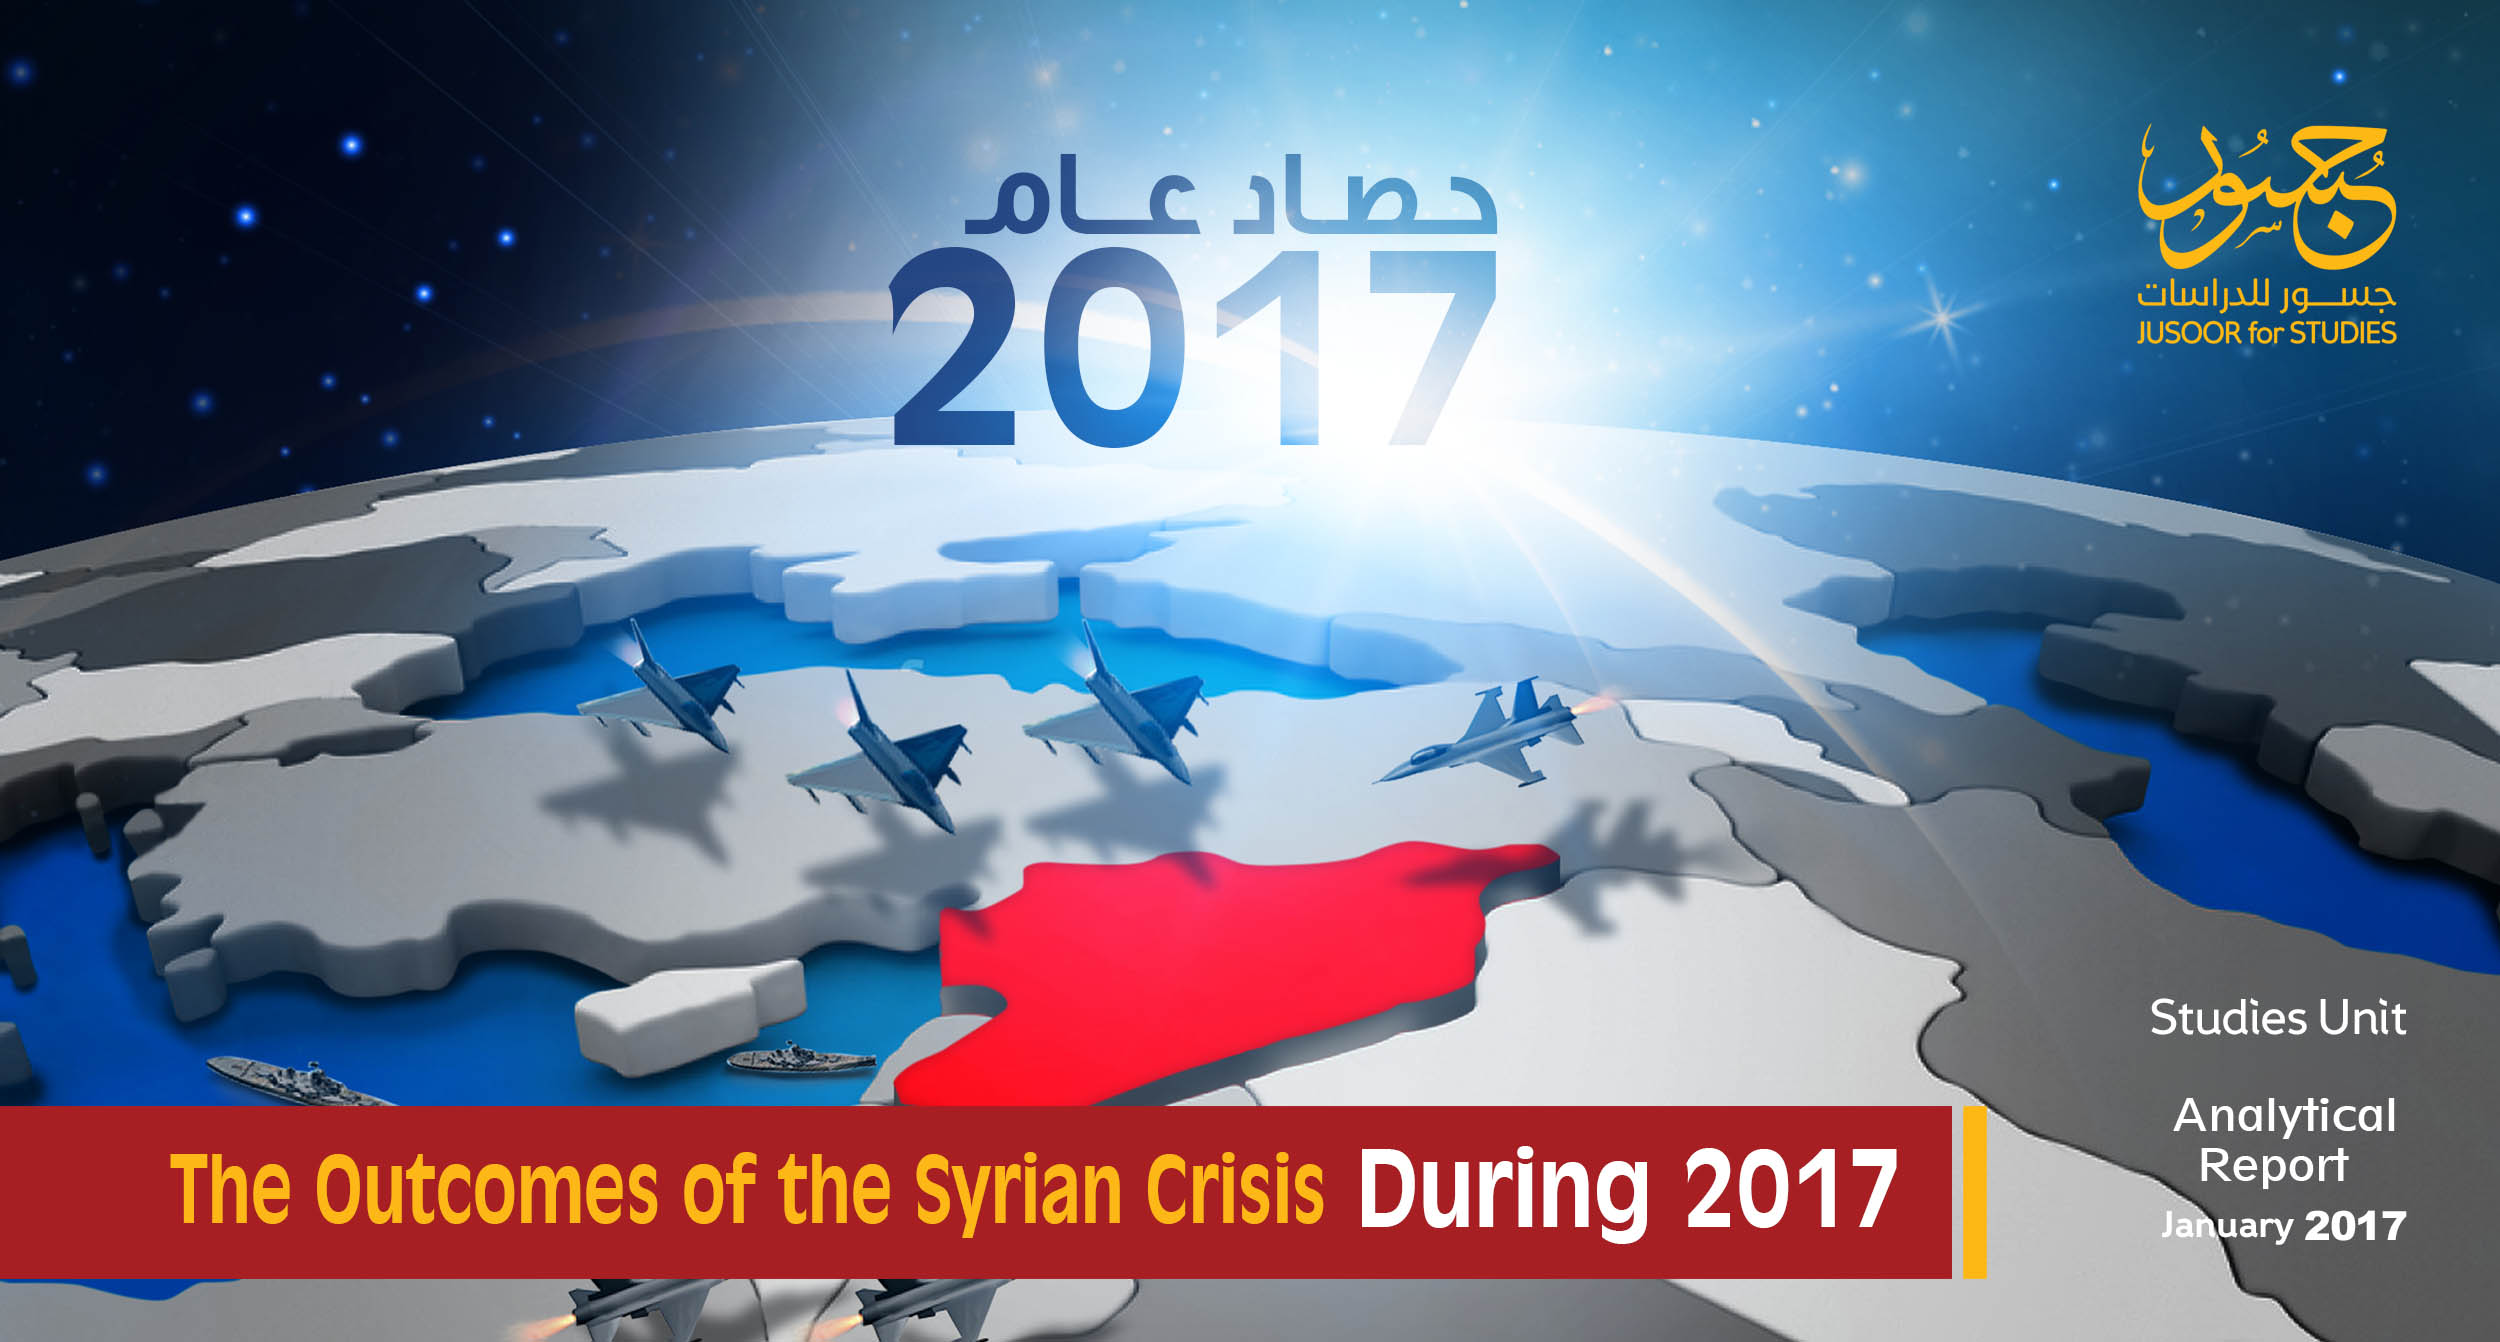 The Outcomes of the Syrian Crisis During 2017